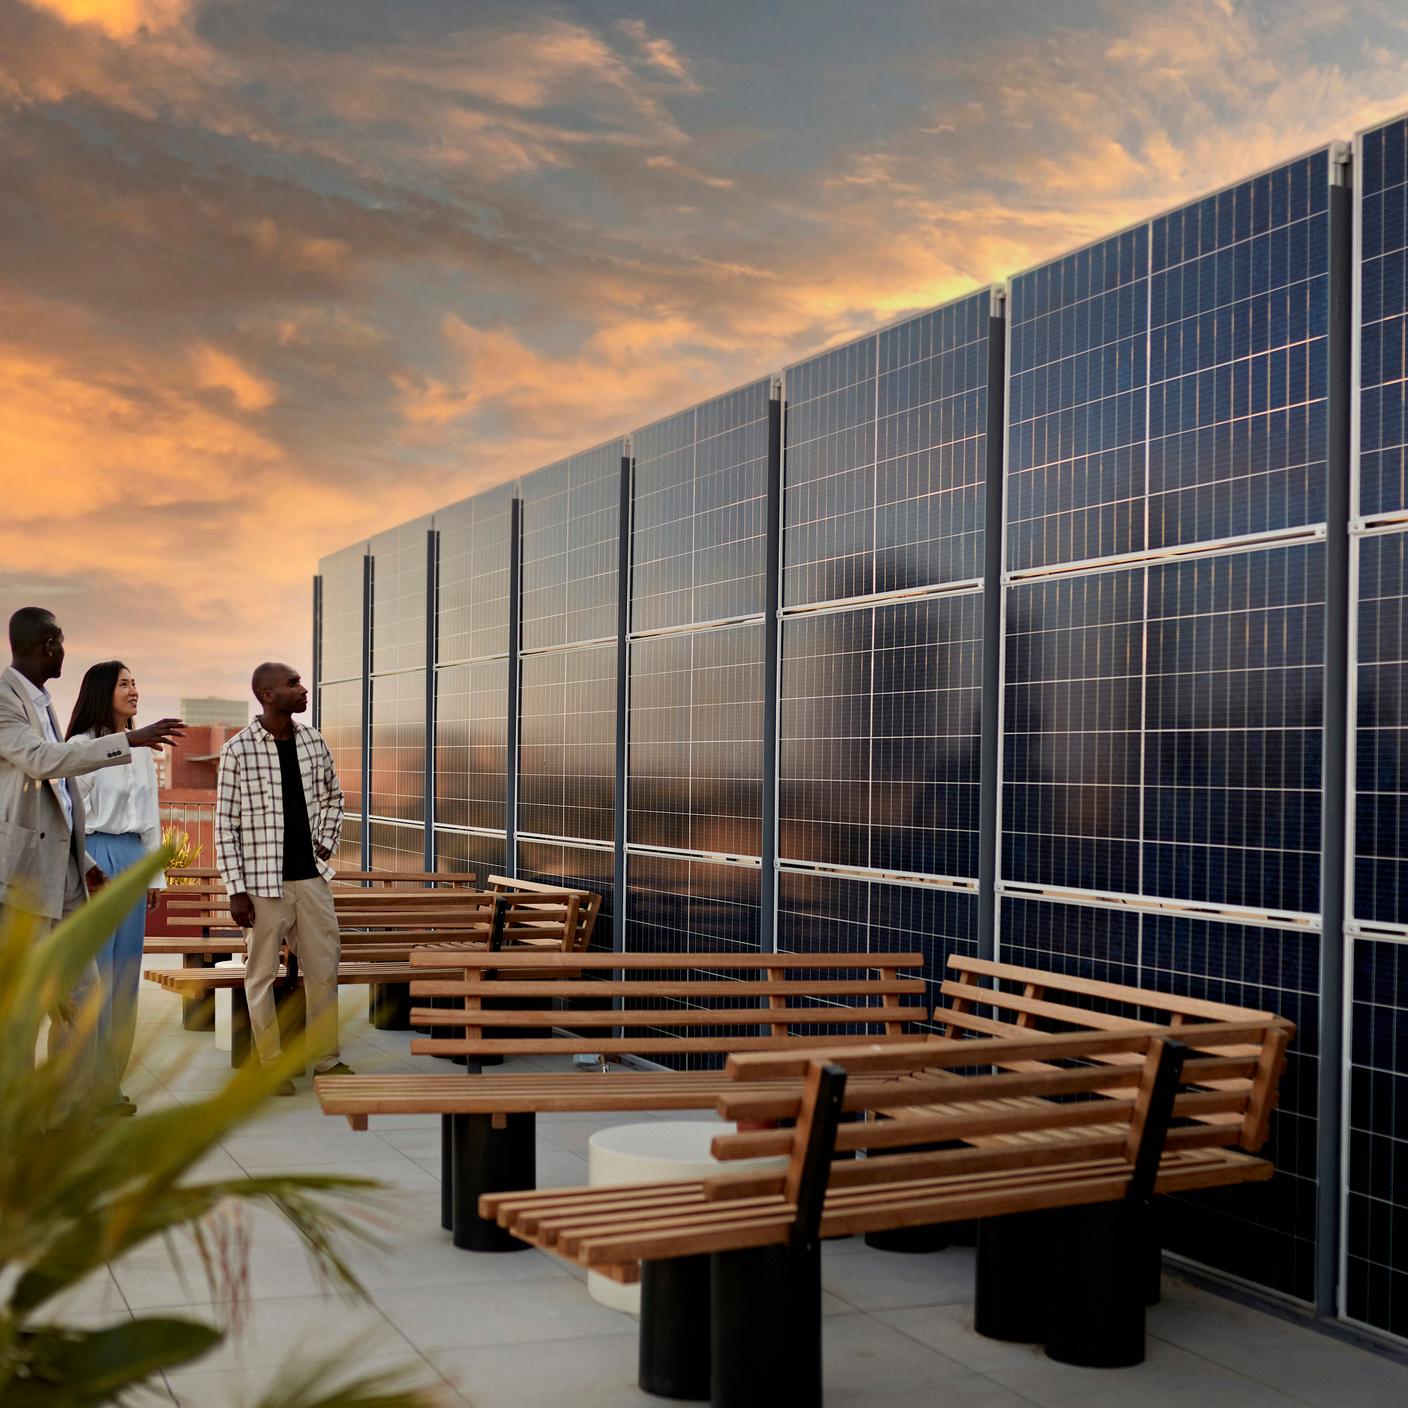 People standing on rooftop of building with solar panel structure